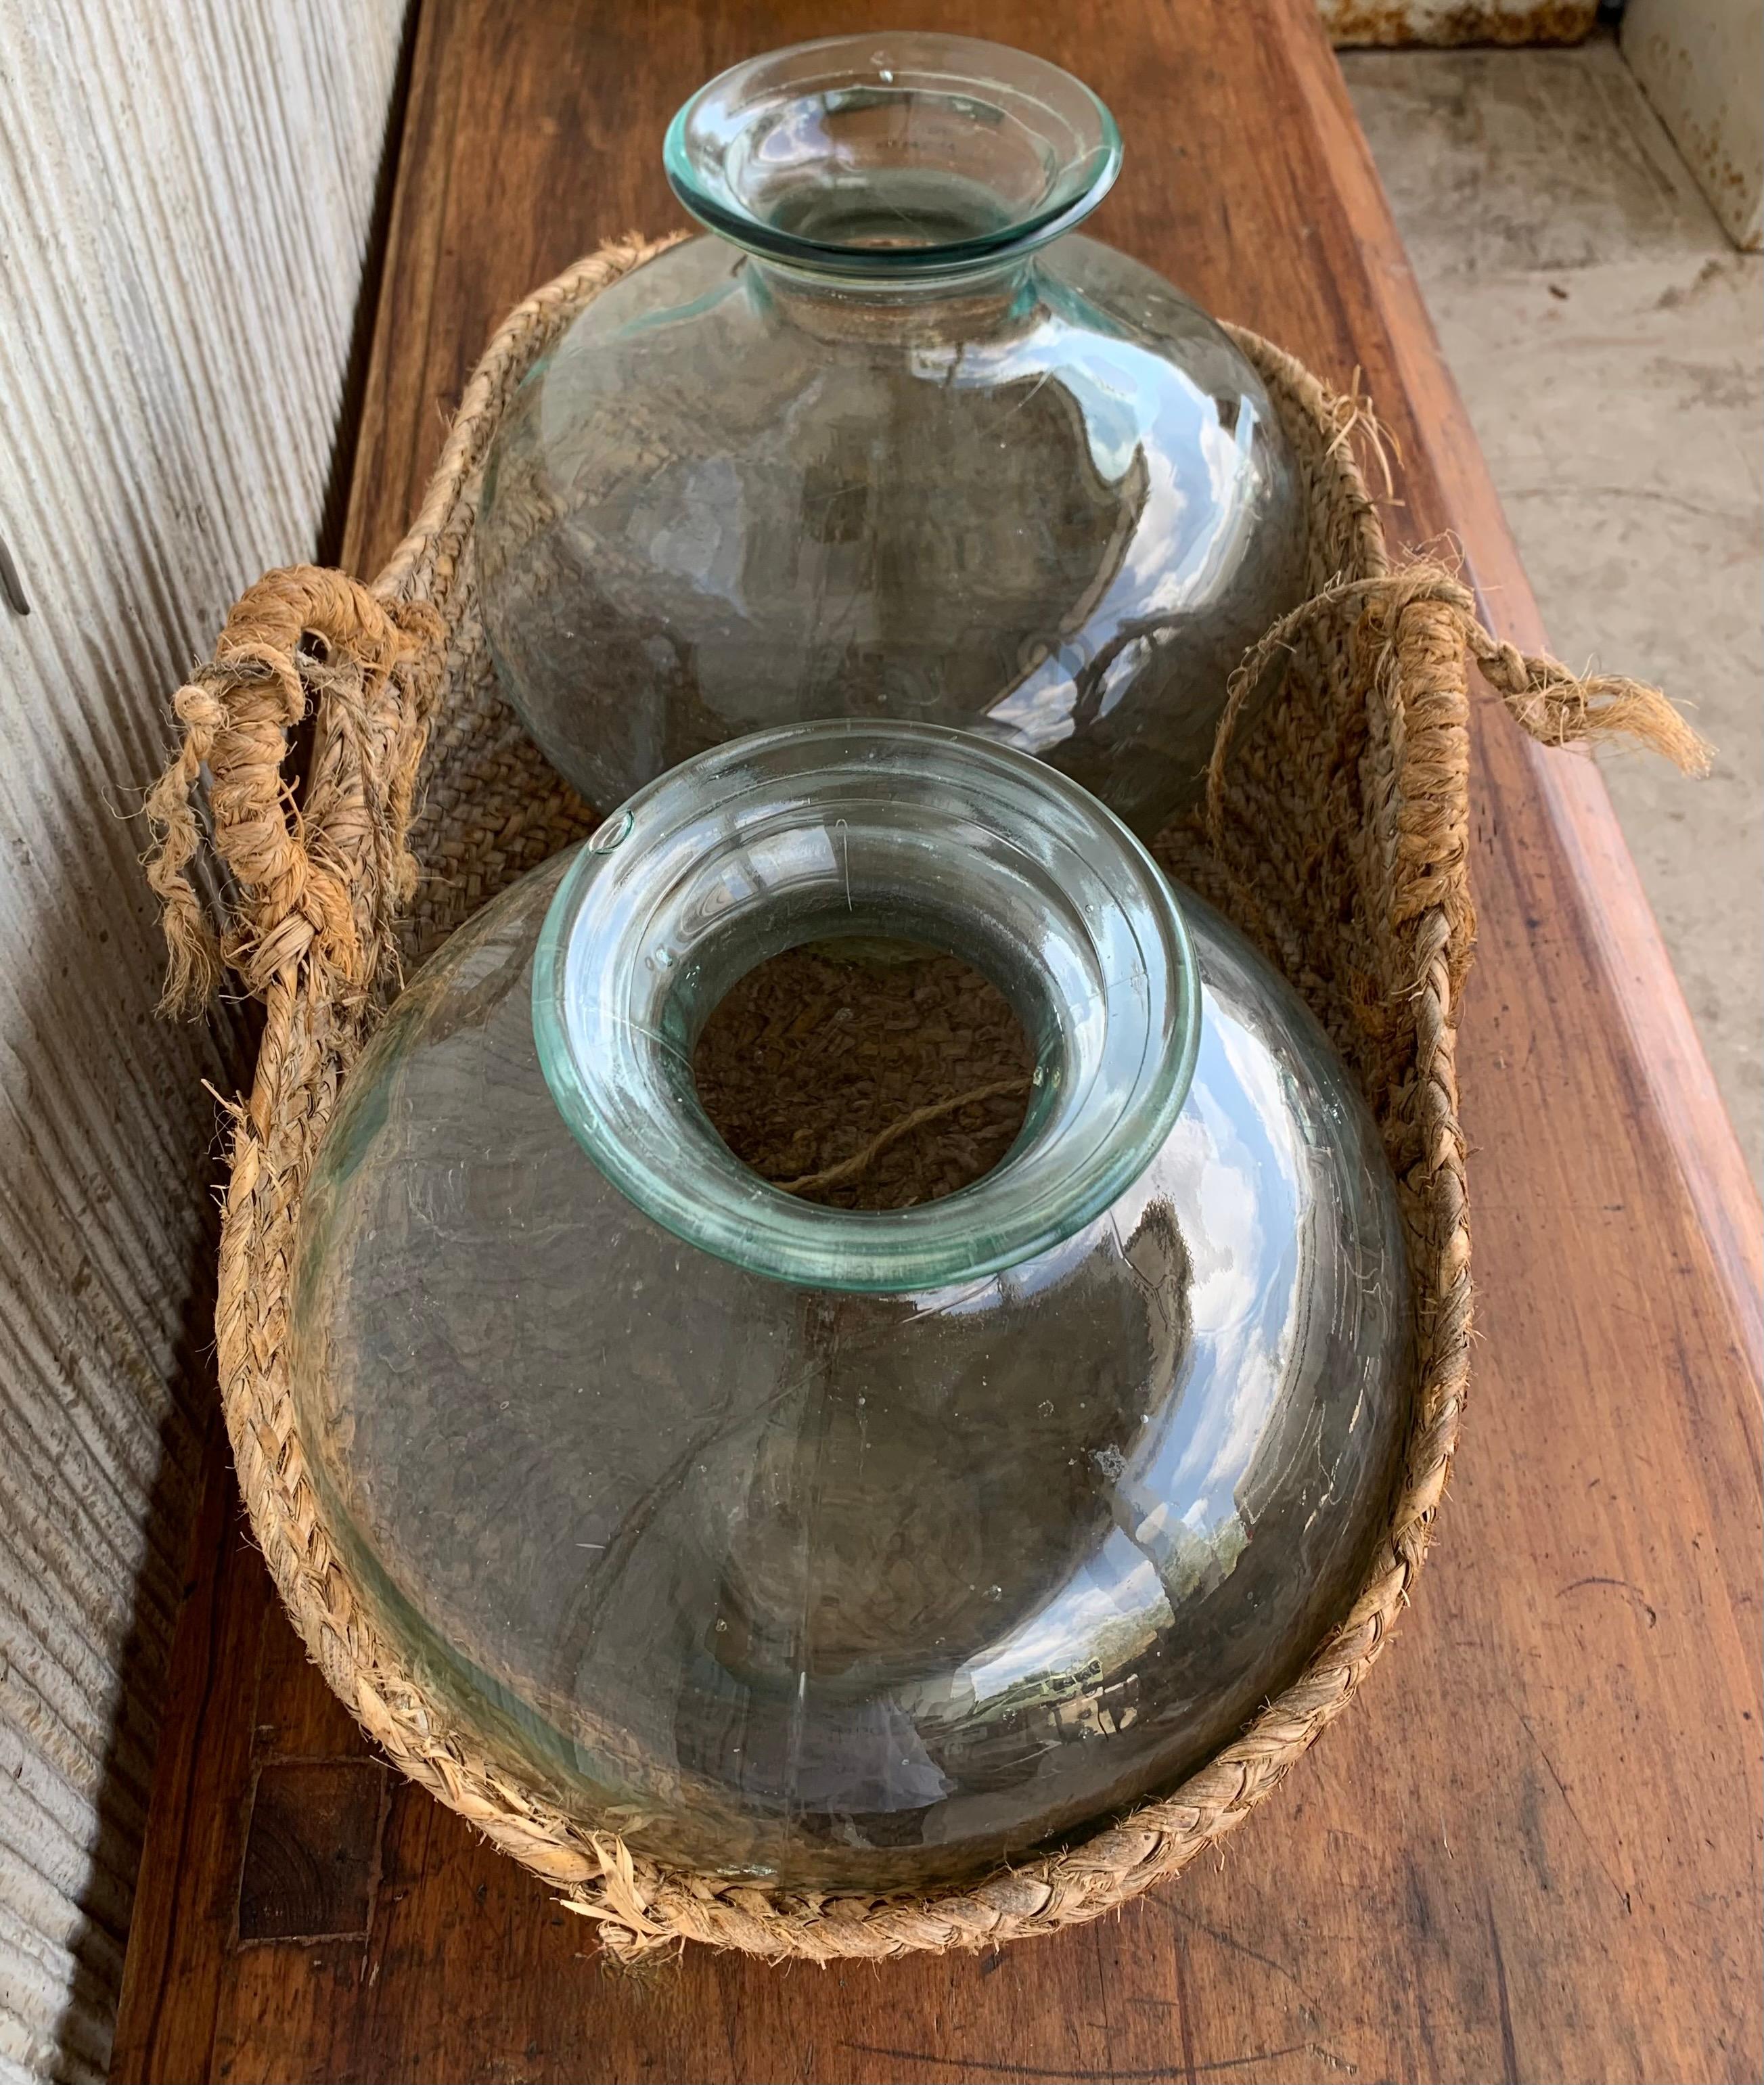 Set of 2 Green Glass French Demijohn Bottles with Woven Esparto Basket In Good Condition For Sale In Miami, FL